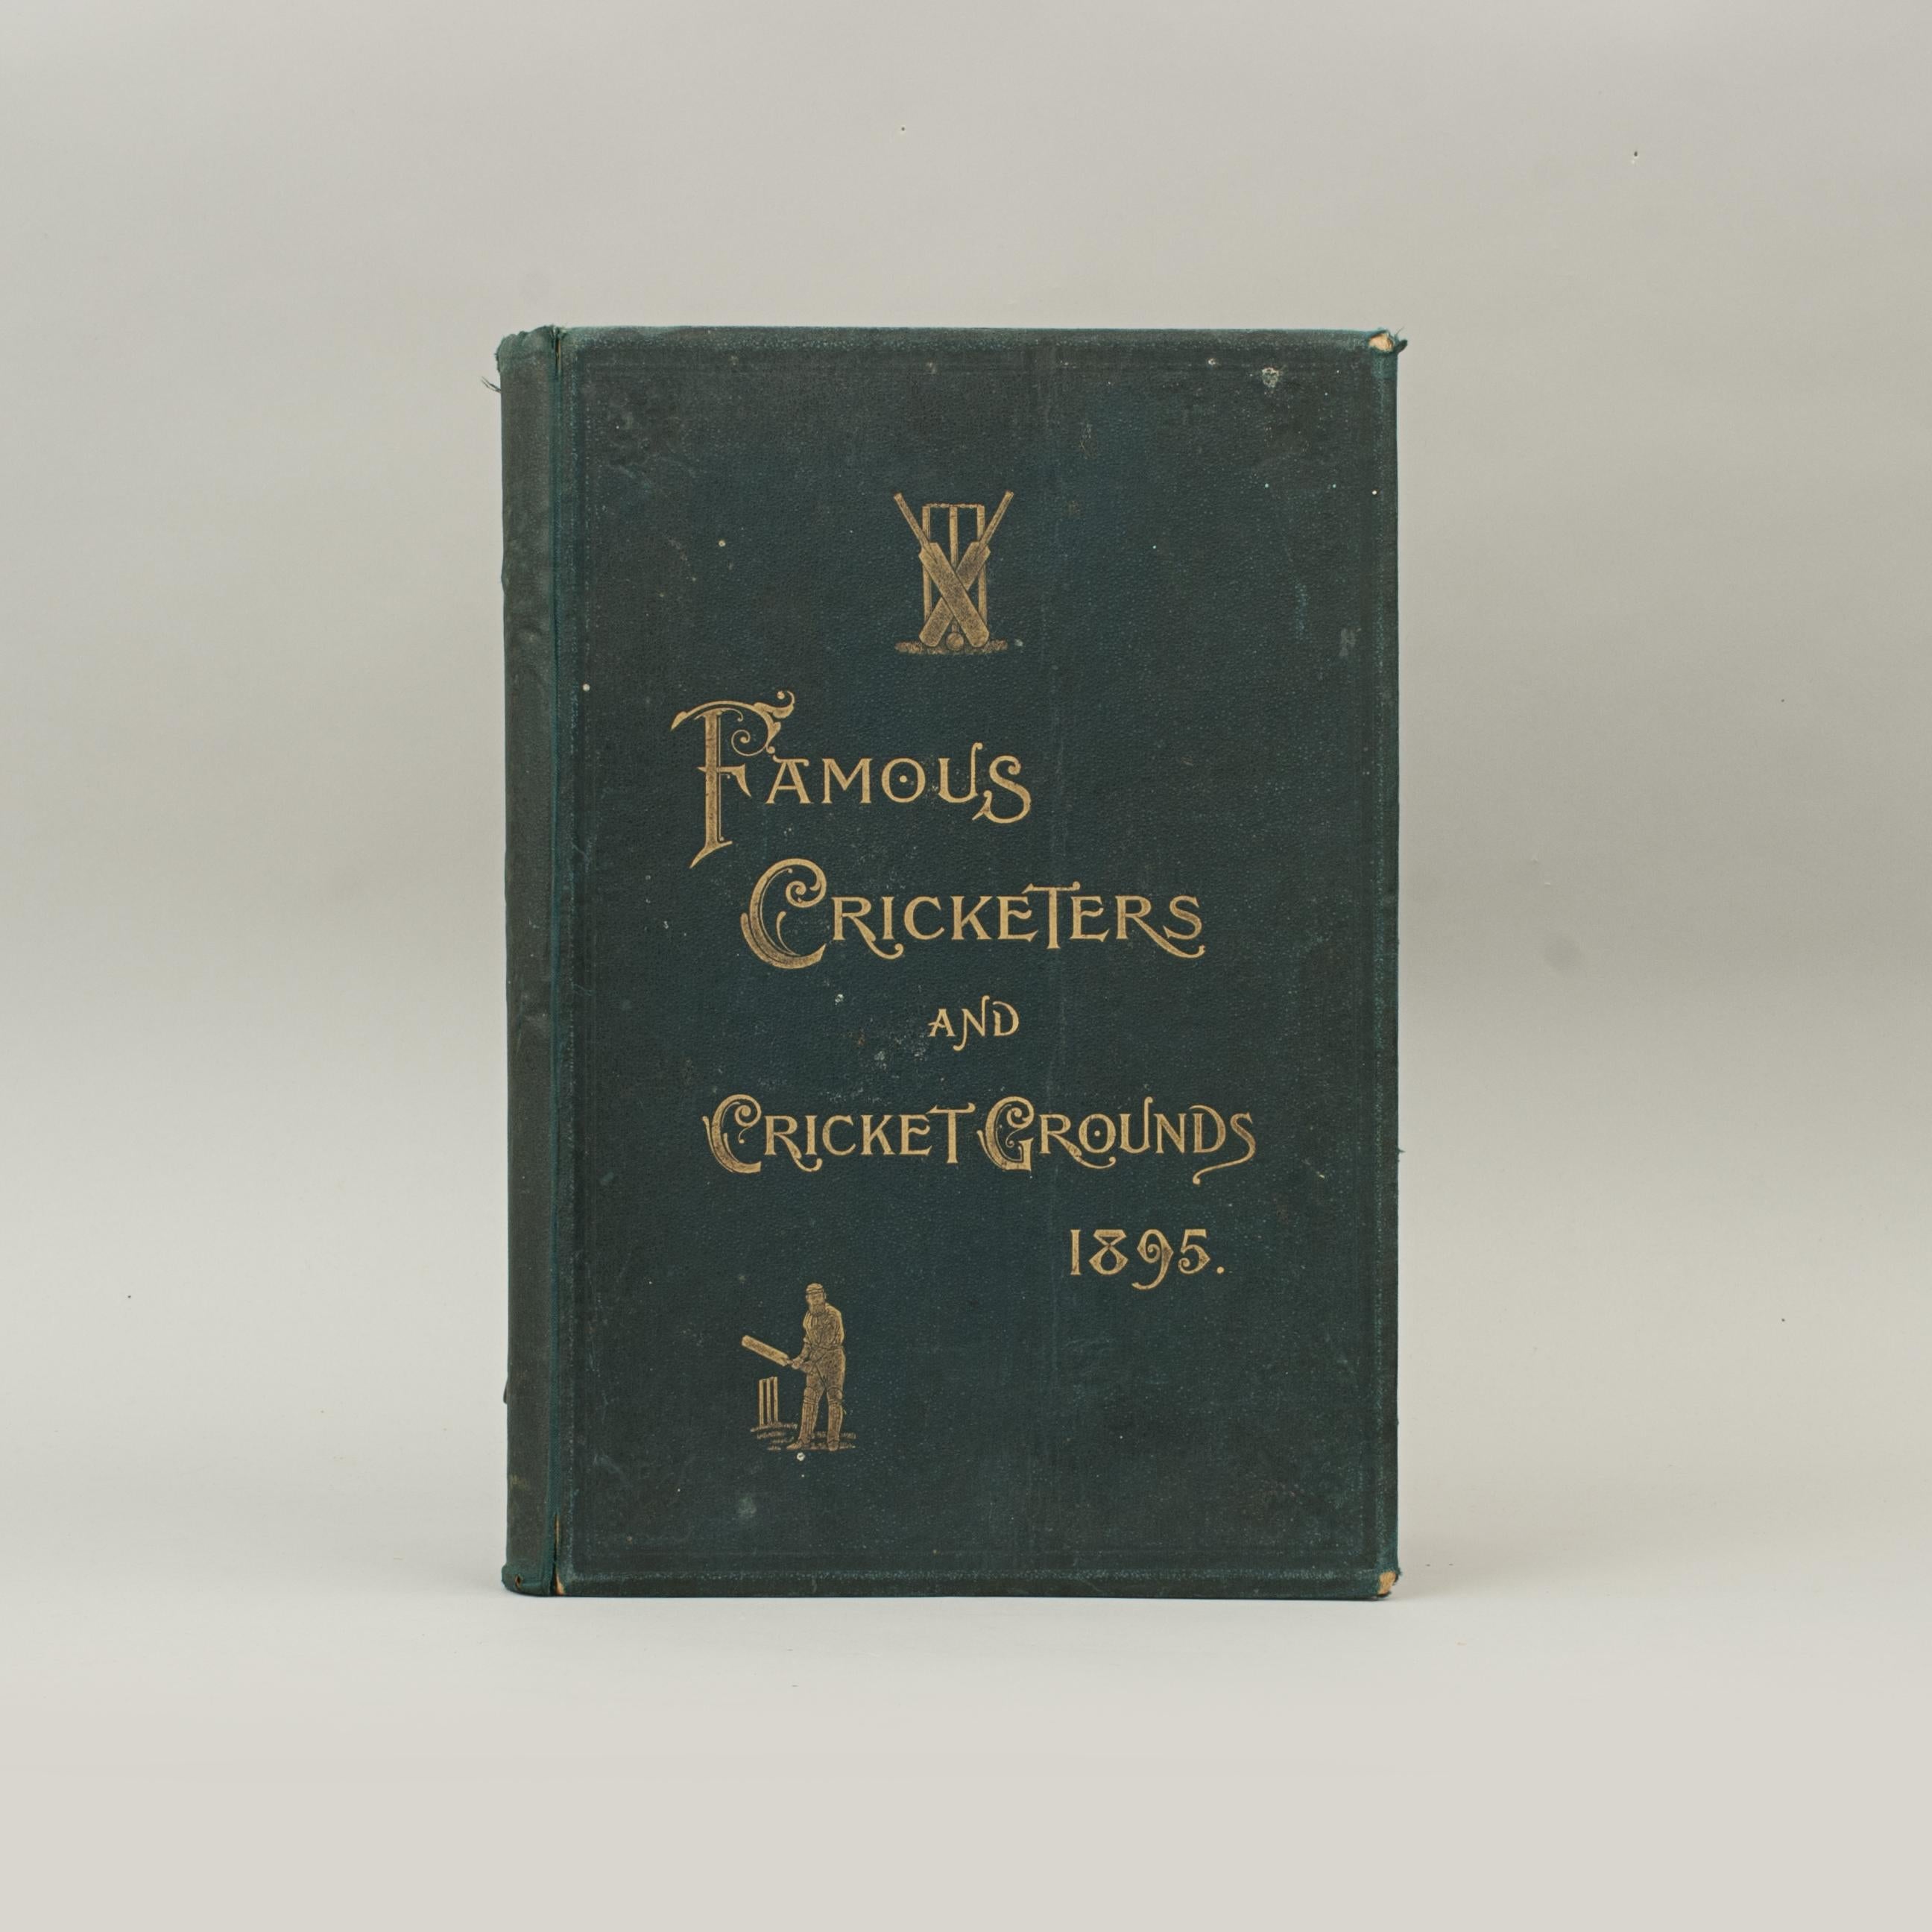 Famous Cricketers and Cricket Grounds 1895.
Large late Victorian first edition cricket book 